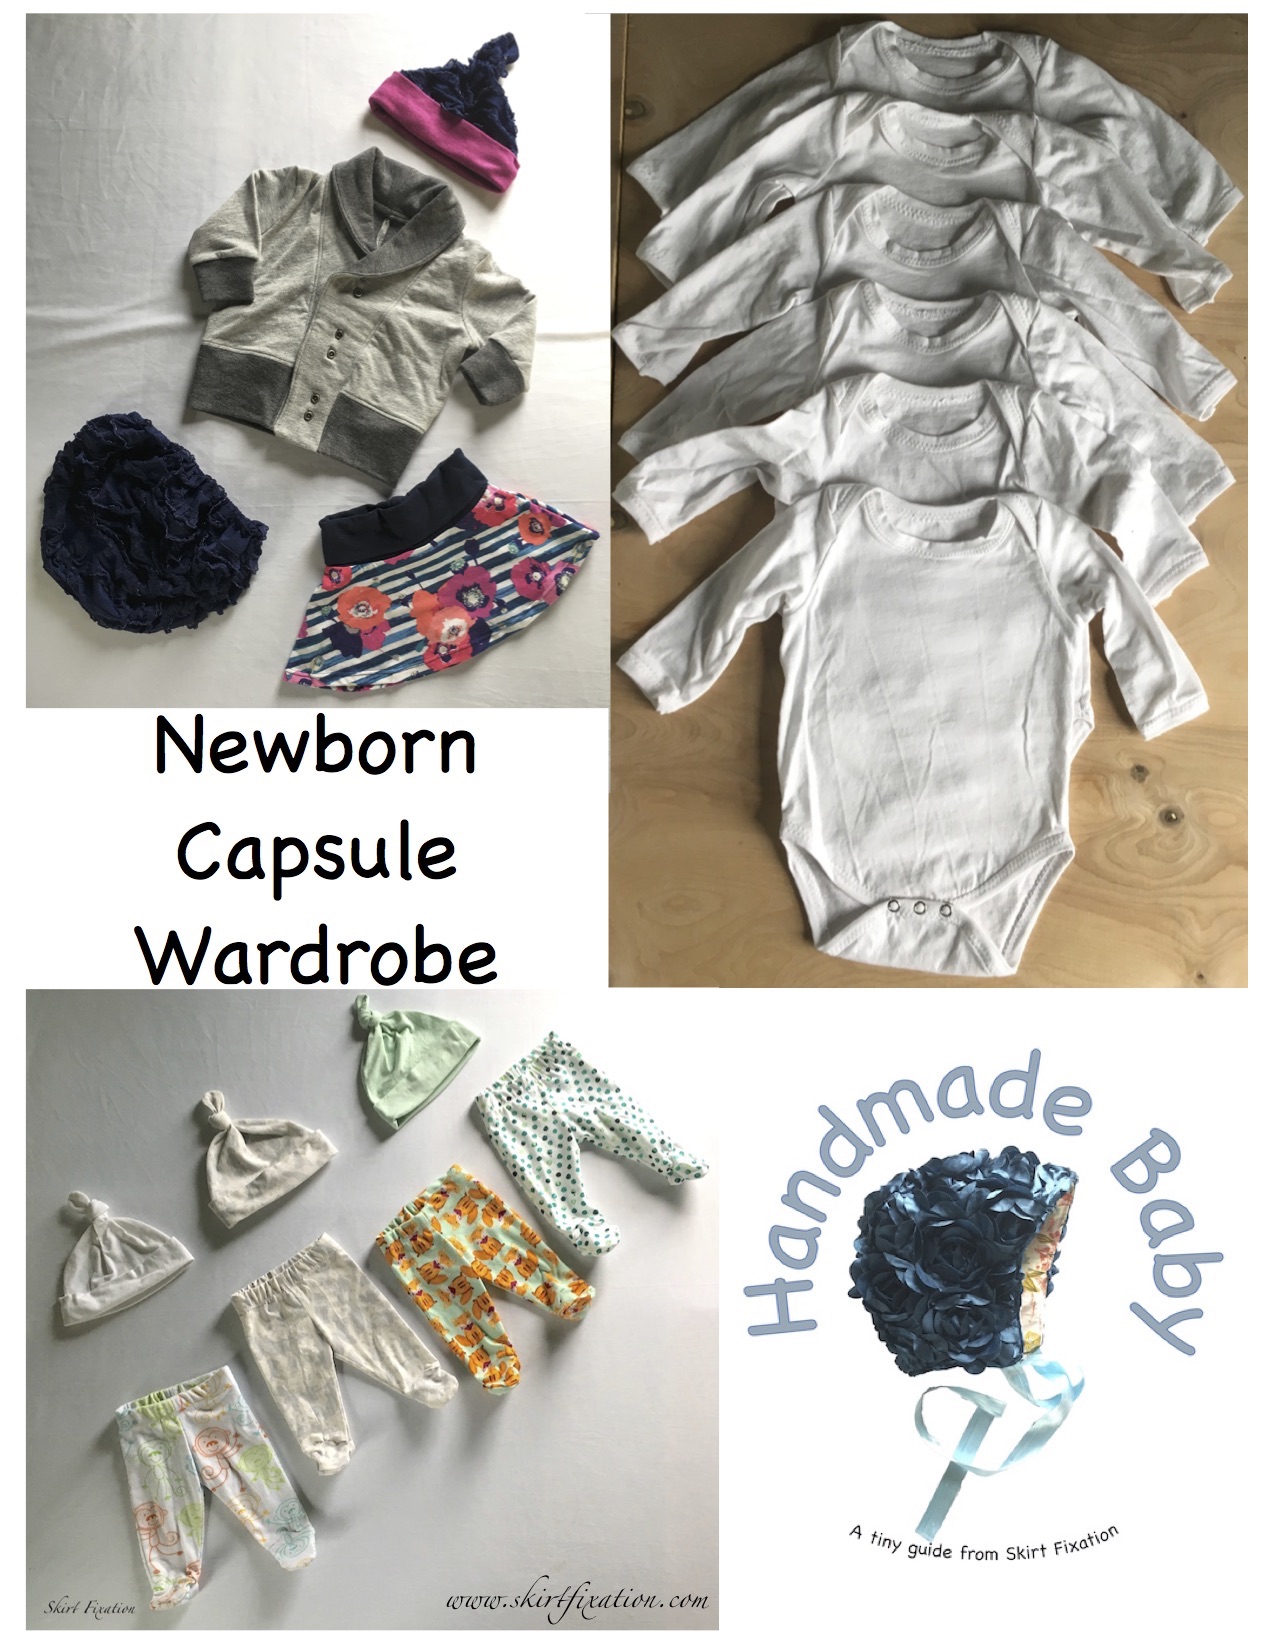 Newborn Capsule Wardrobe, the perfect guide from Skirt Fixation